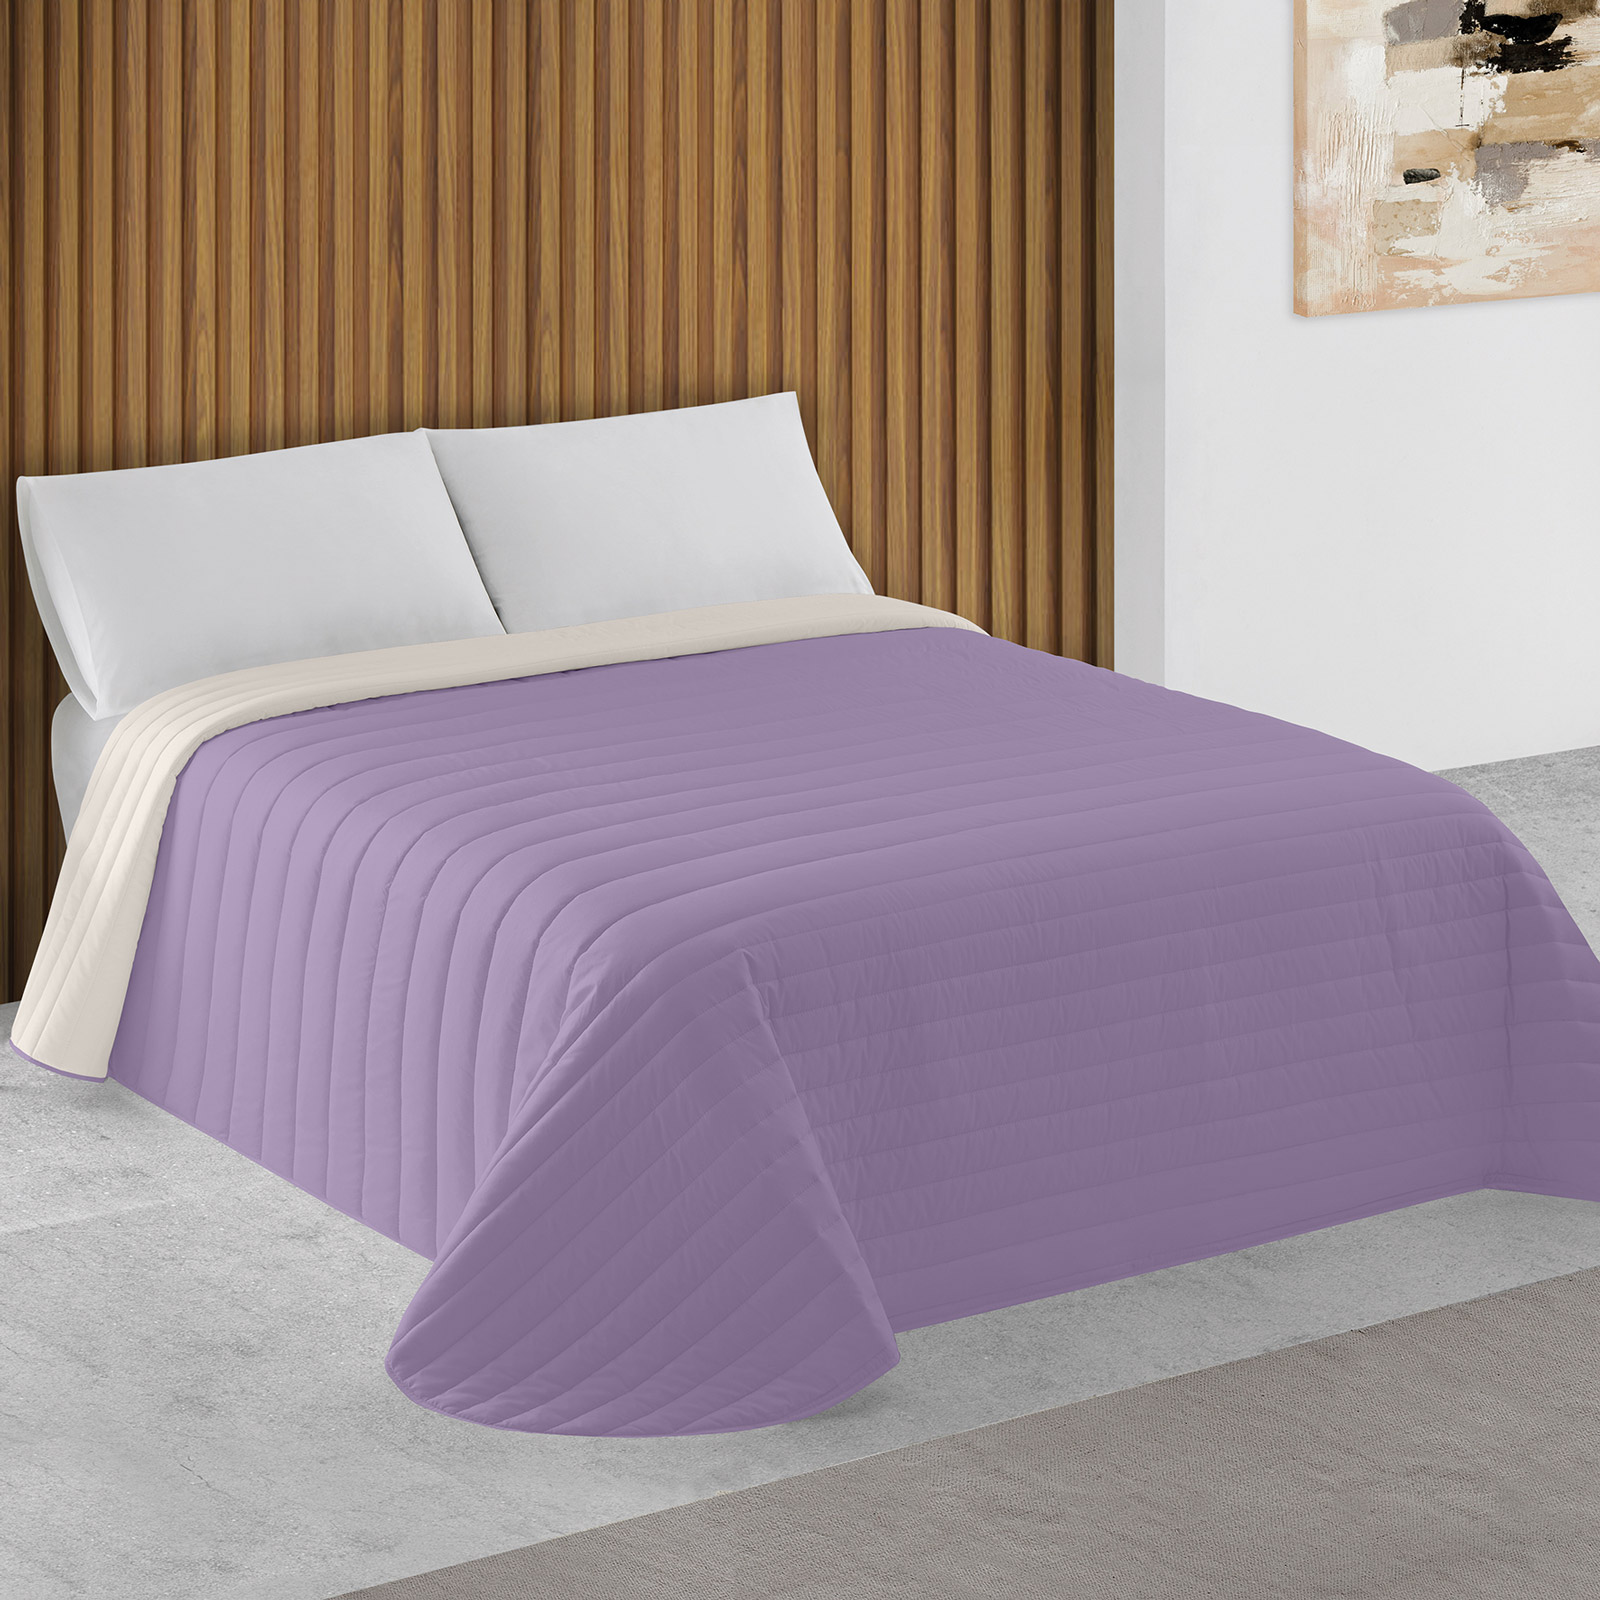 Two-tone Bouti bedspread violet and stone